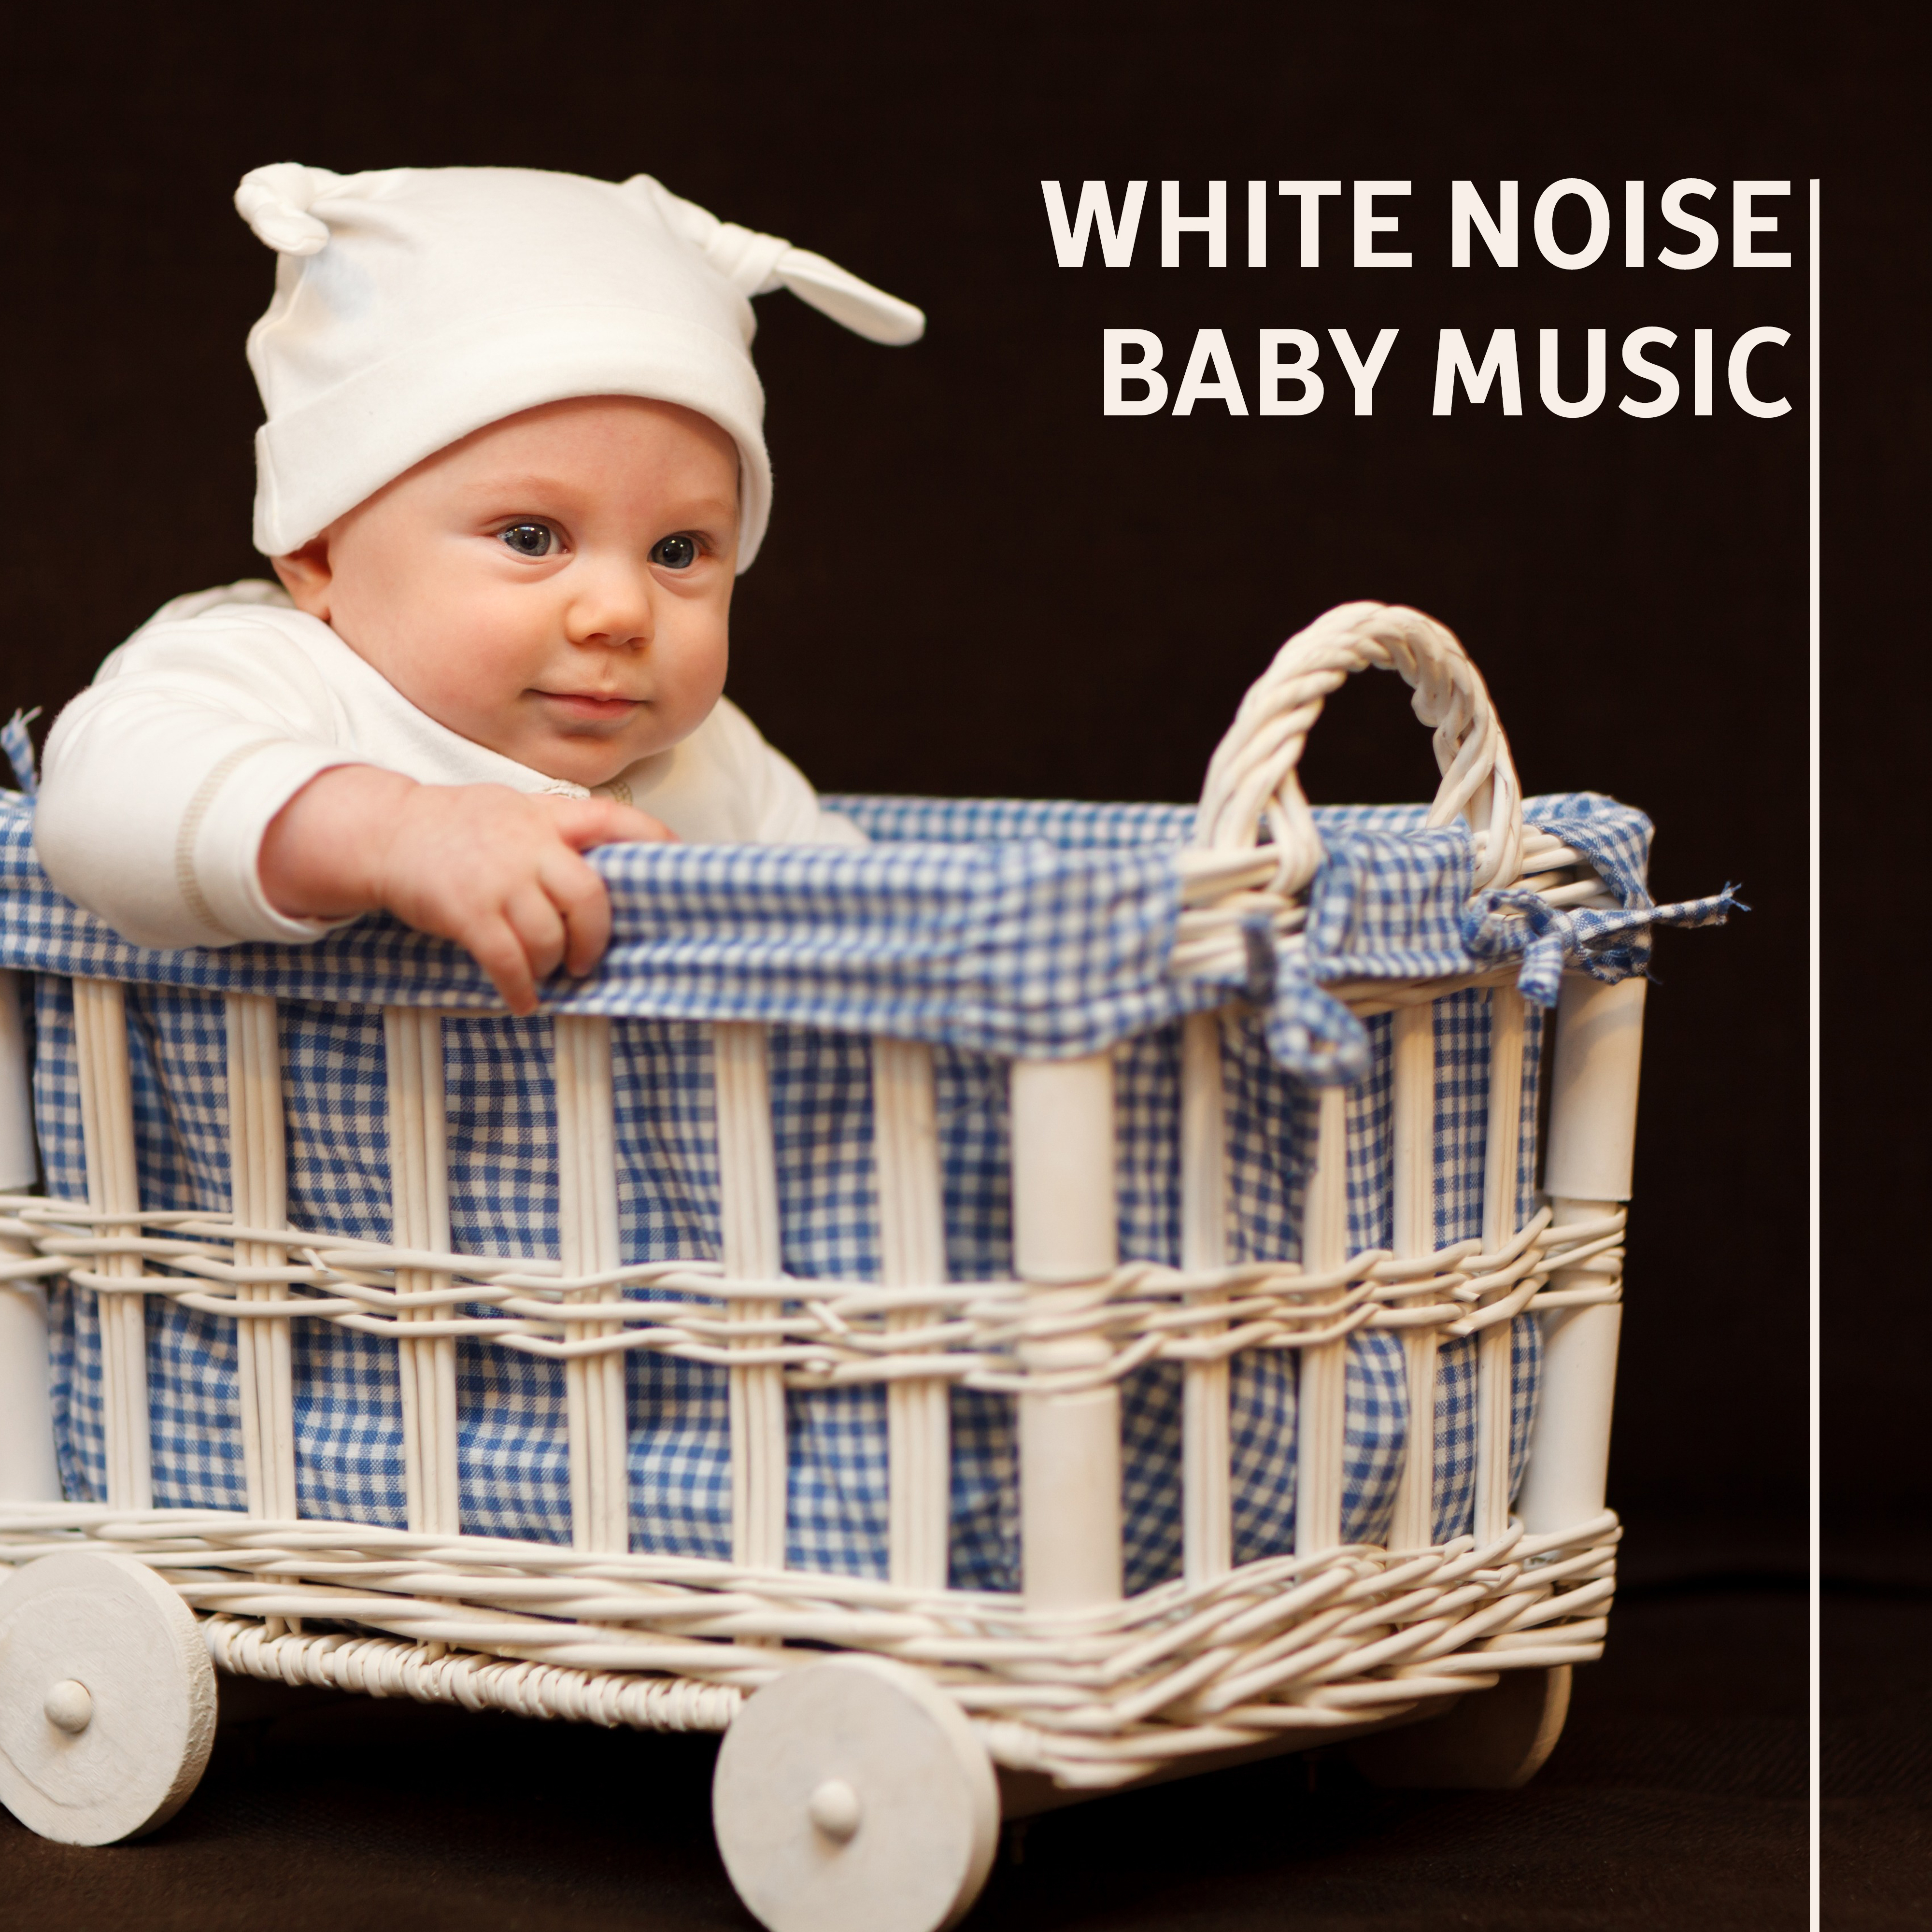 White Noise Baby Music – Relaxing Music for Baby, Calm Down, Sleep, Fall Asleep Easily, Lullabies for Babies